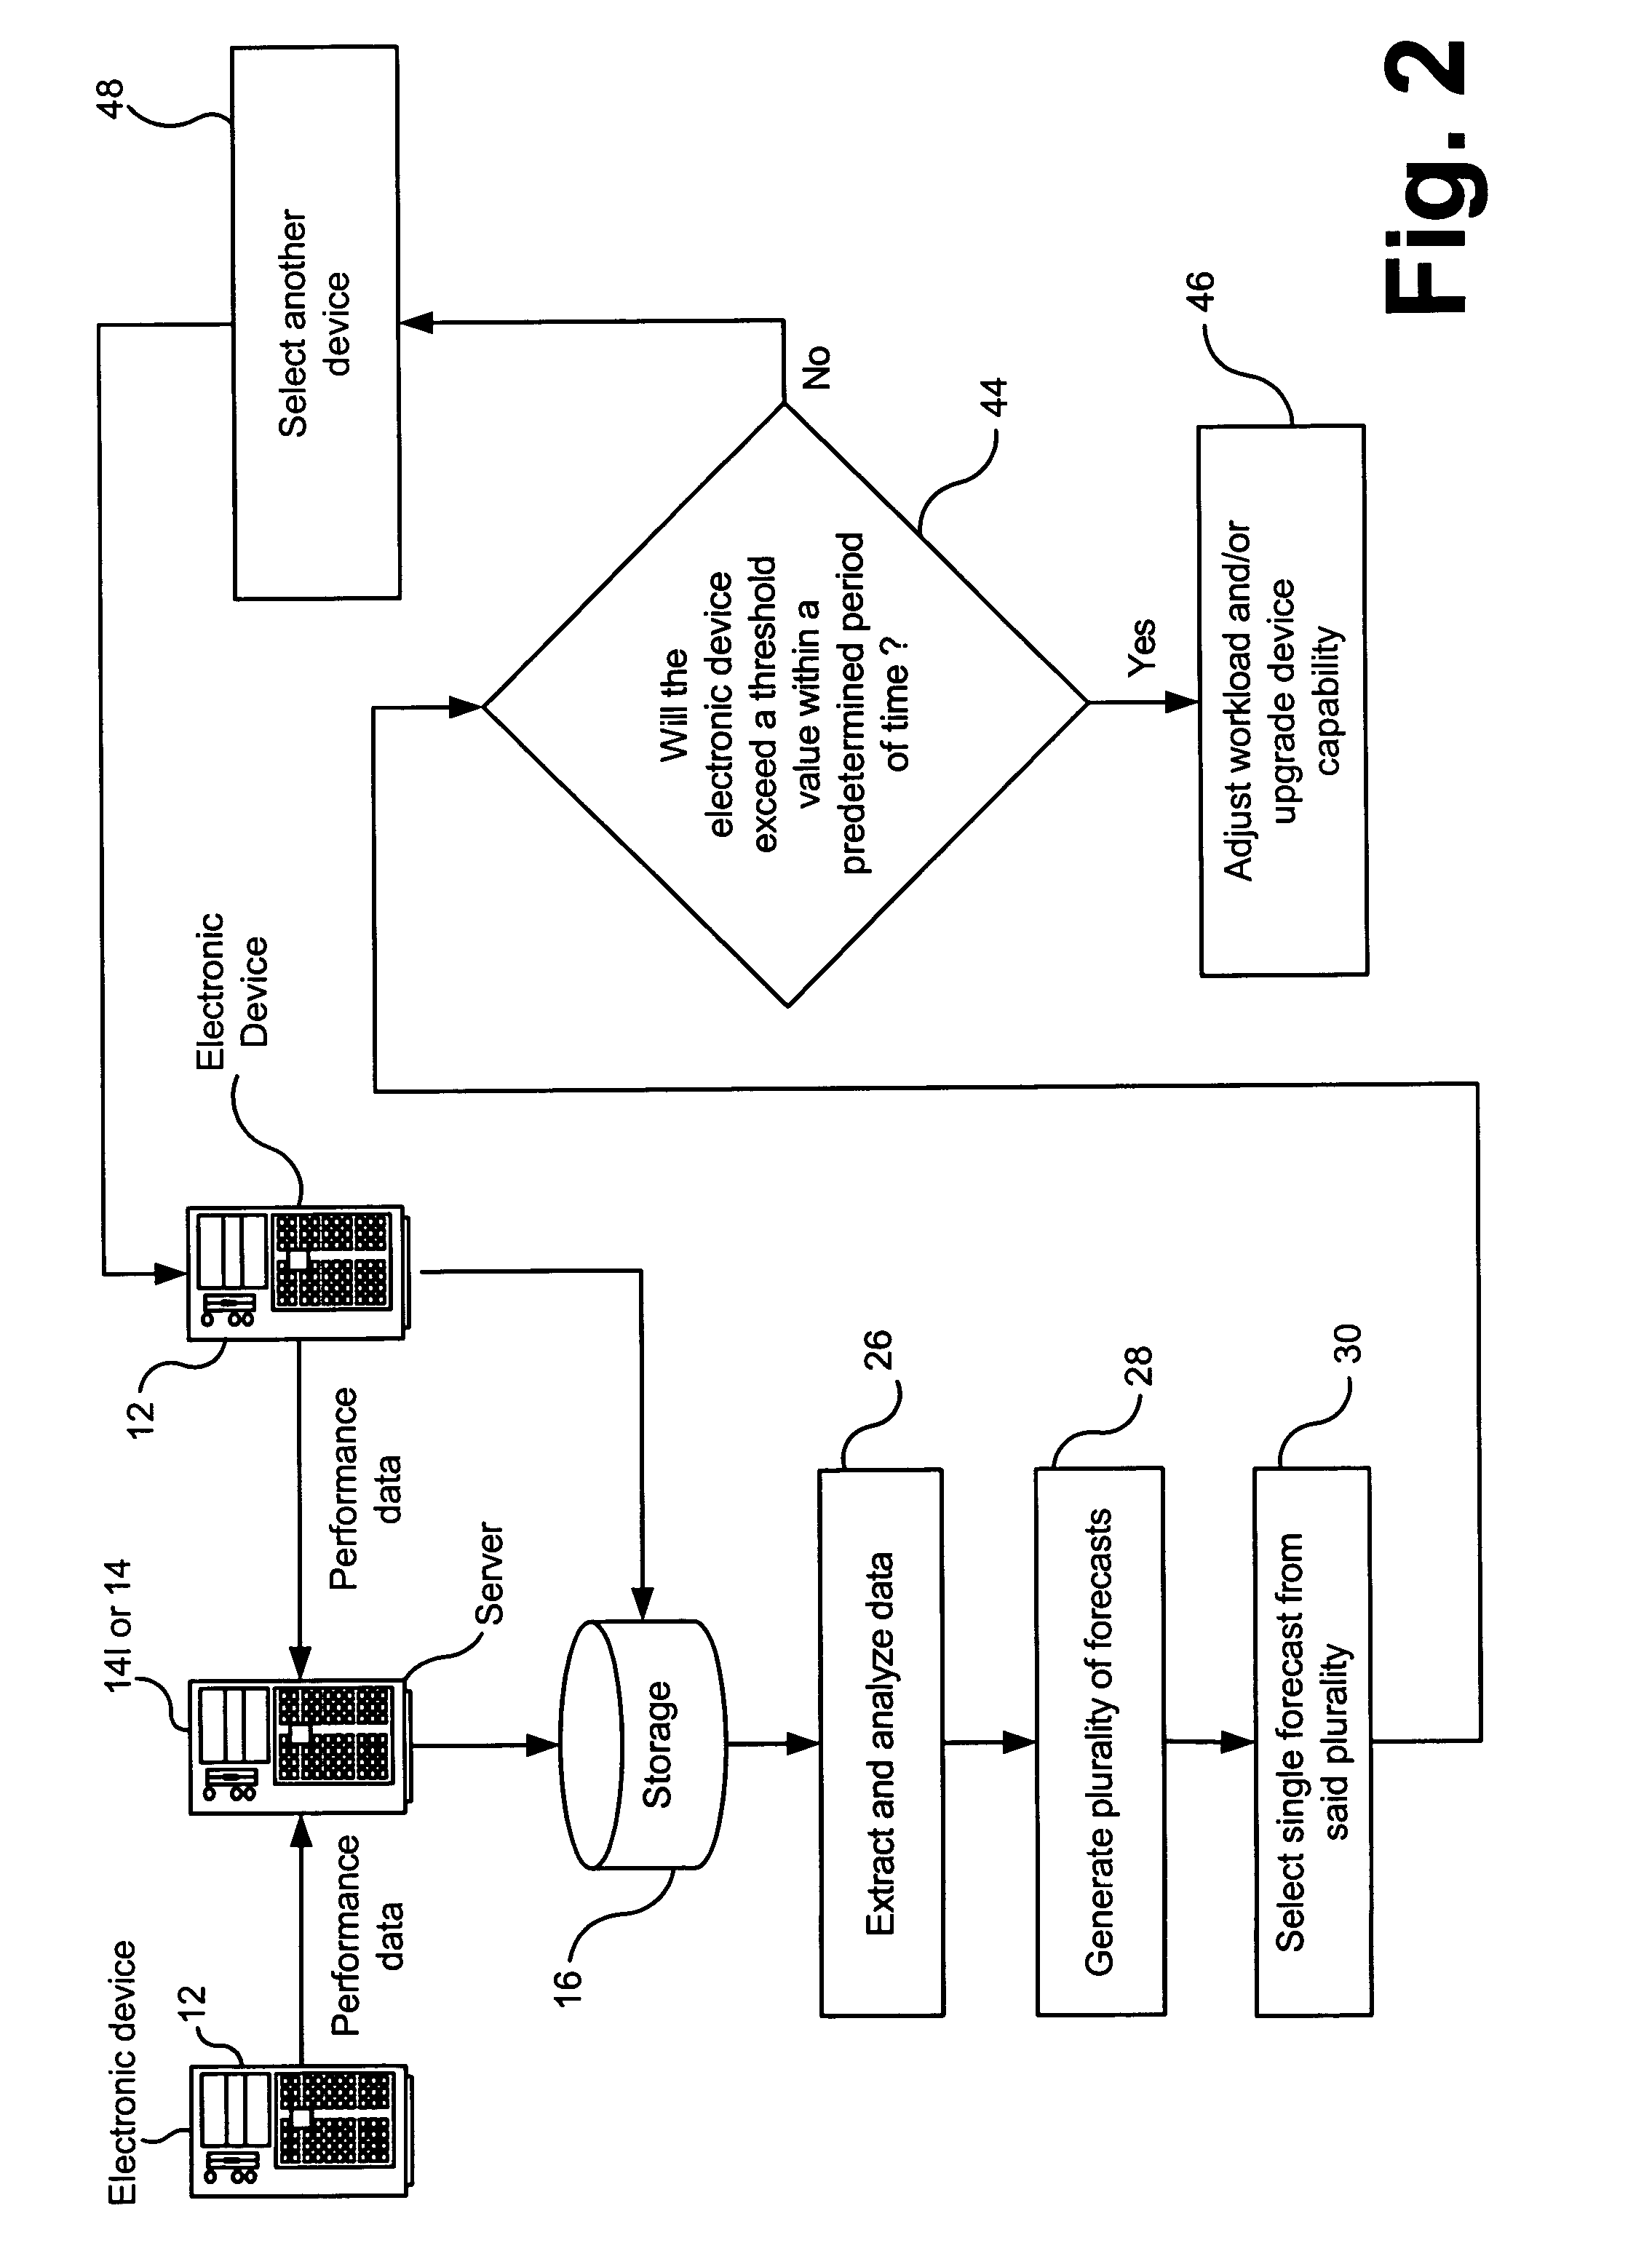 Apparatus and method for managing the performance of an electronic device